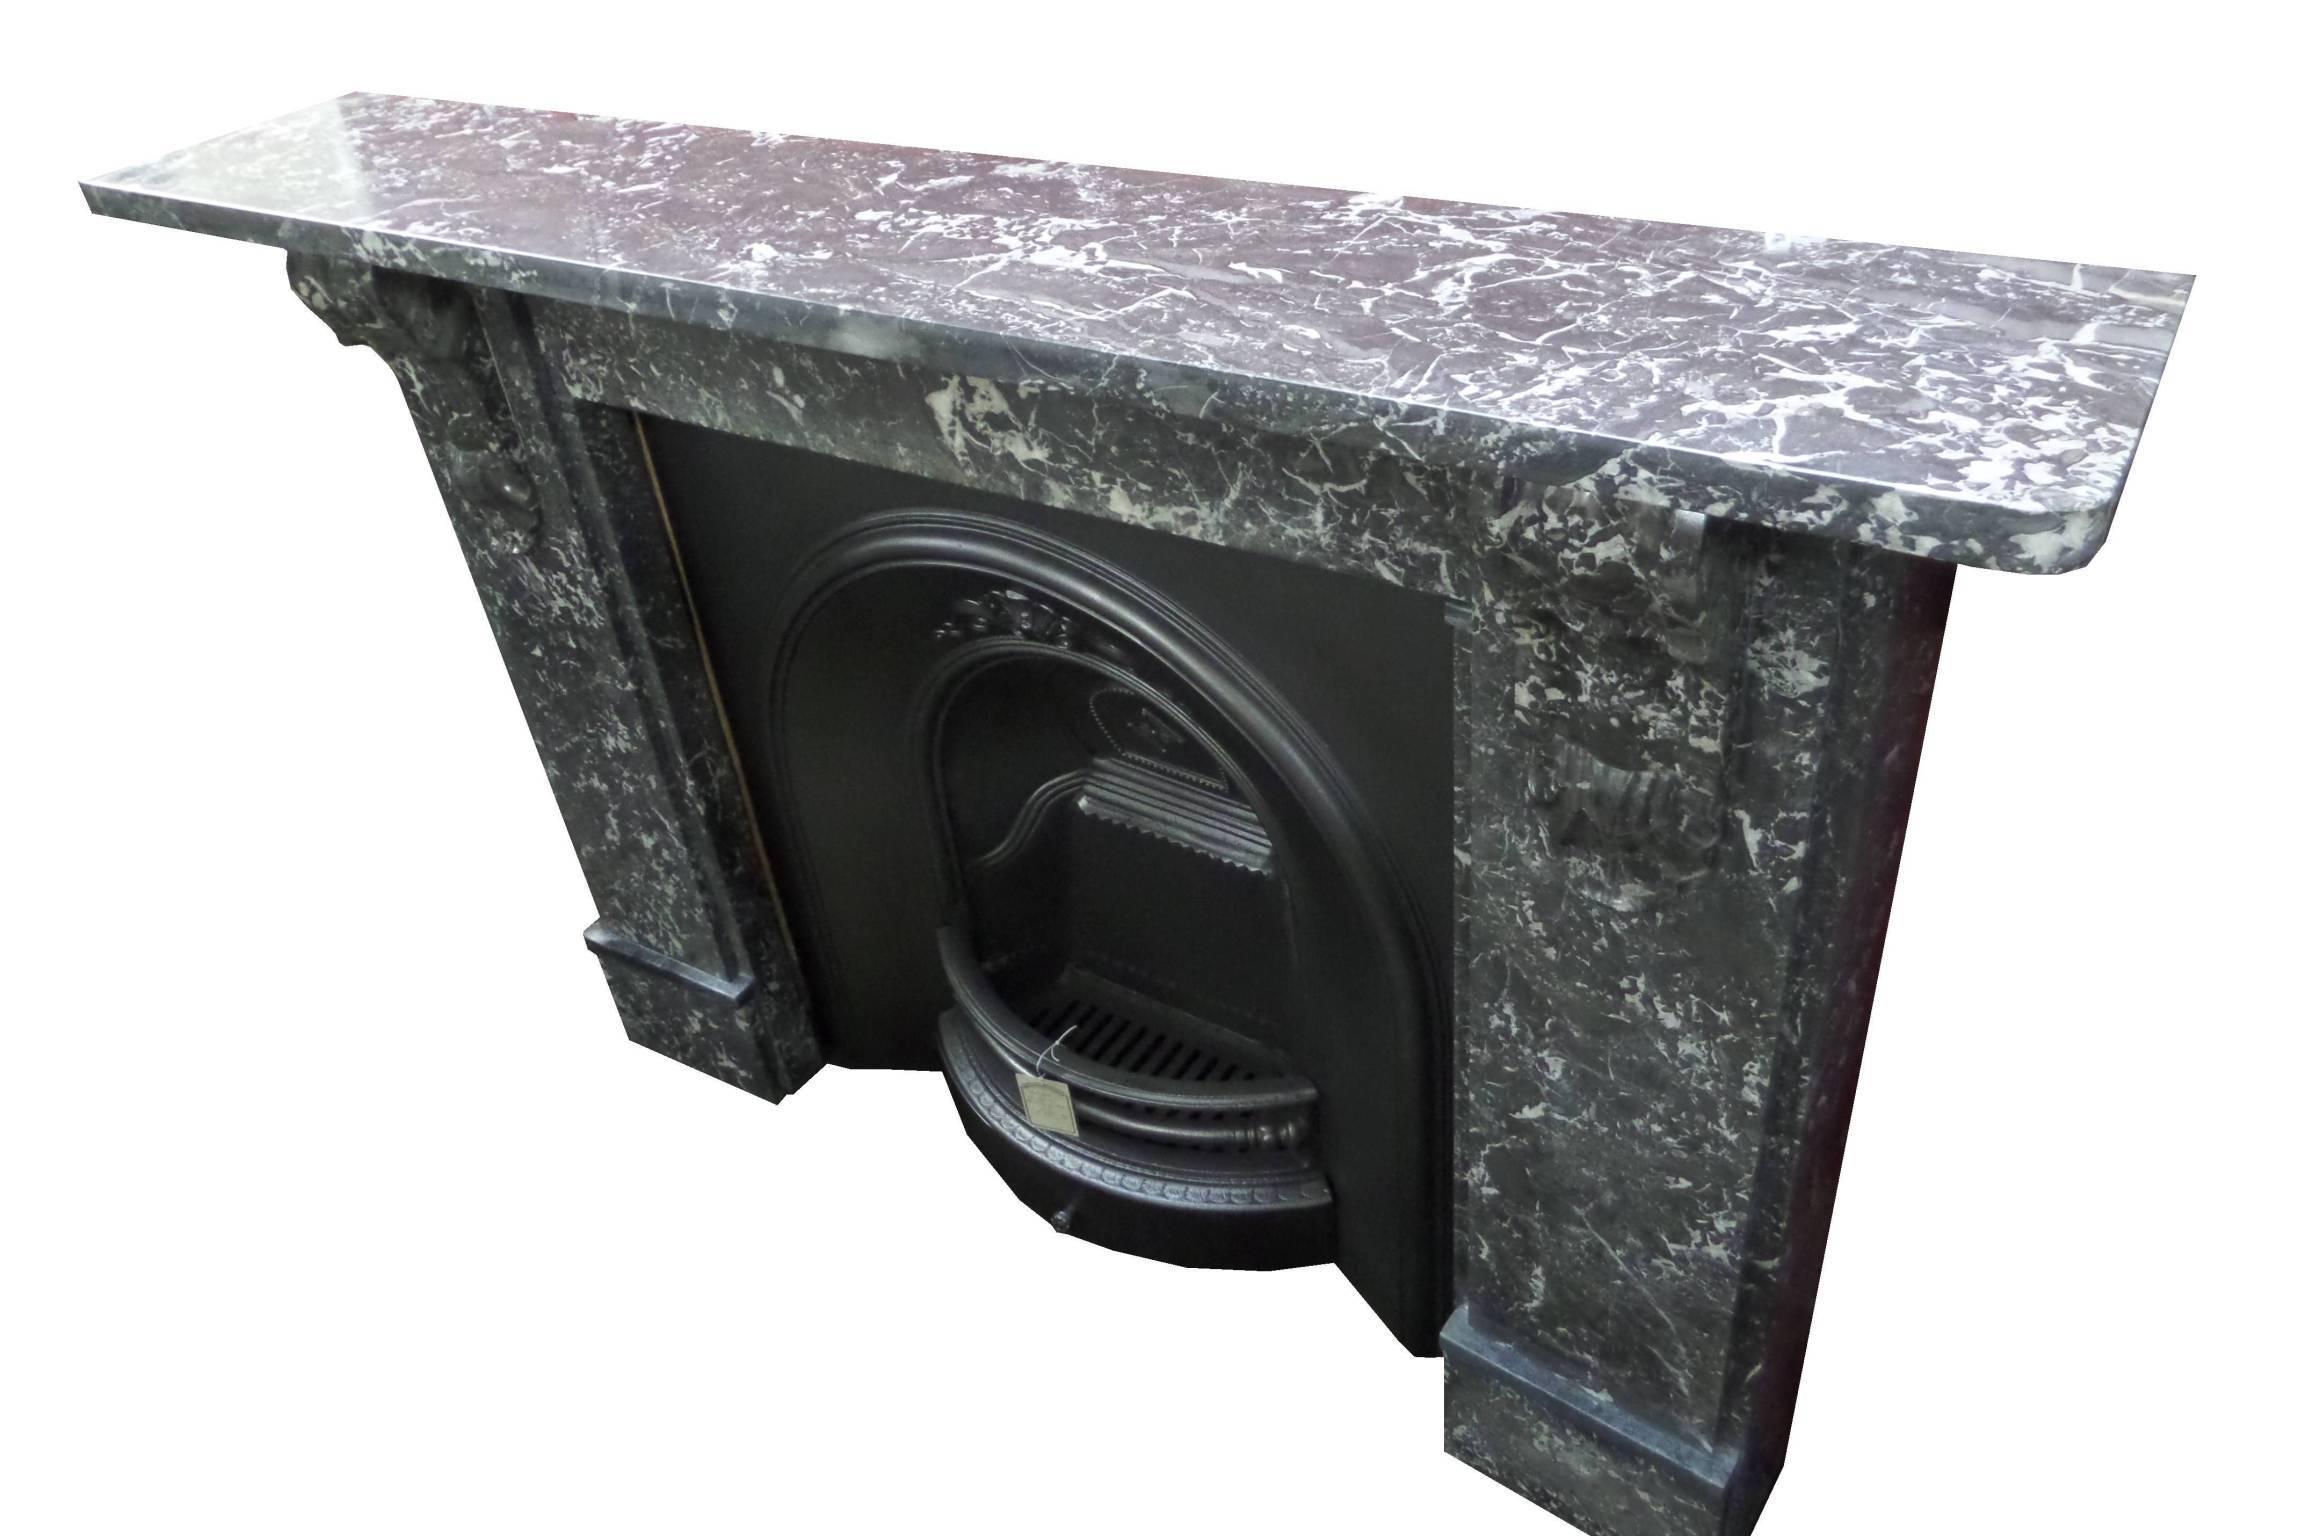 Antique restored Victorian black St. Anne's Marble Mantel / Surround, circa 1880-1890. The sea shell corbel is to a high standard and finely detailed .Opening width and leg to leg can be adjusted by design on installation.
 